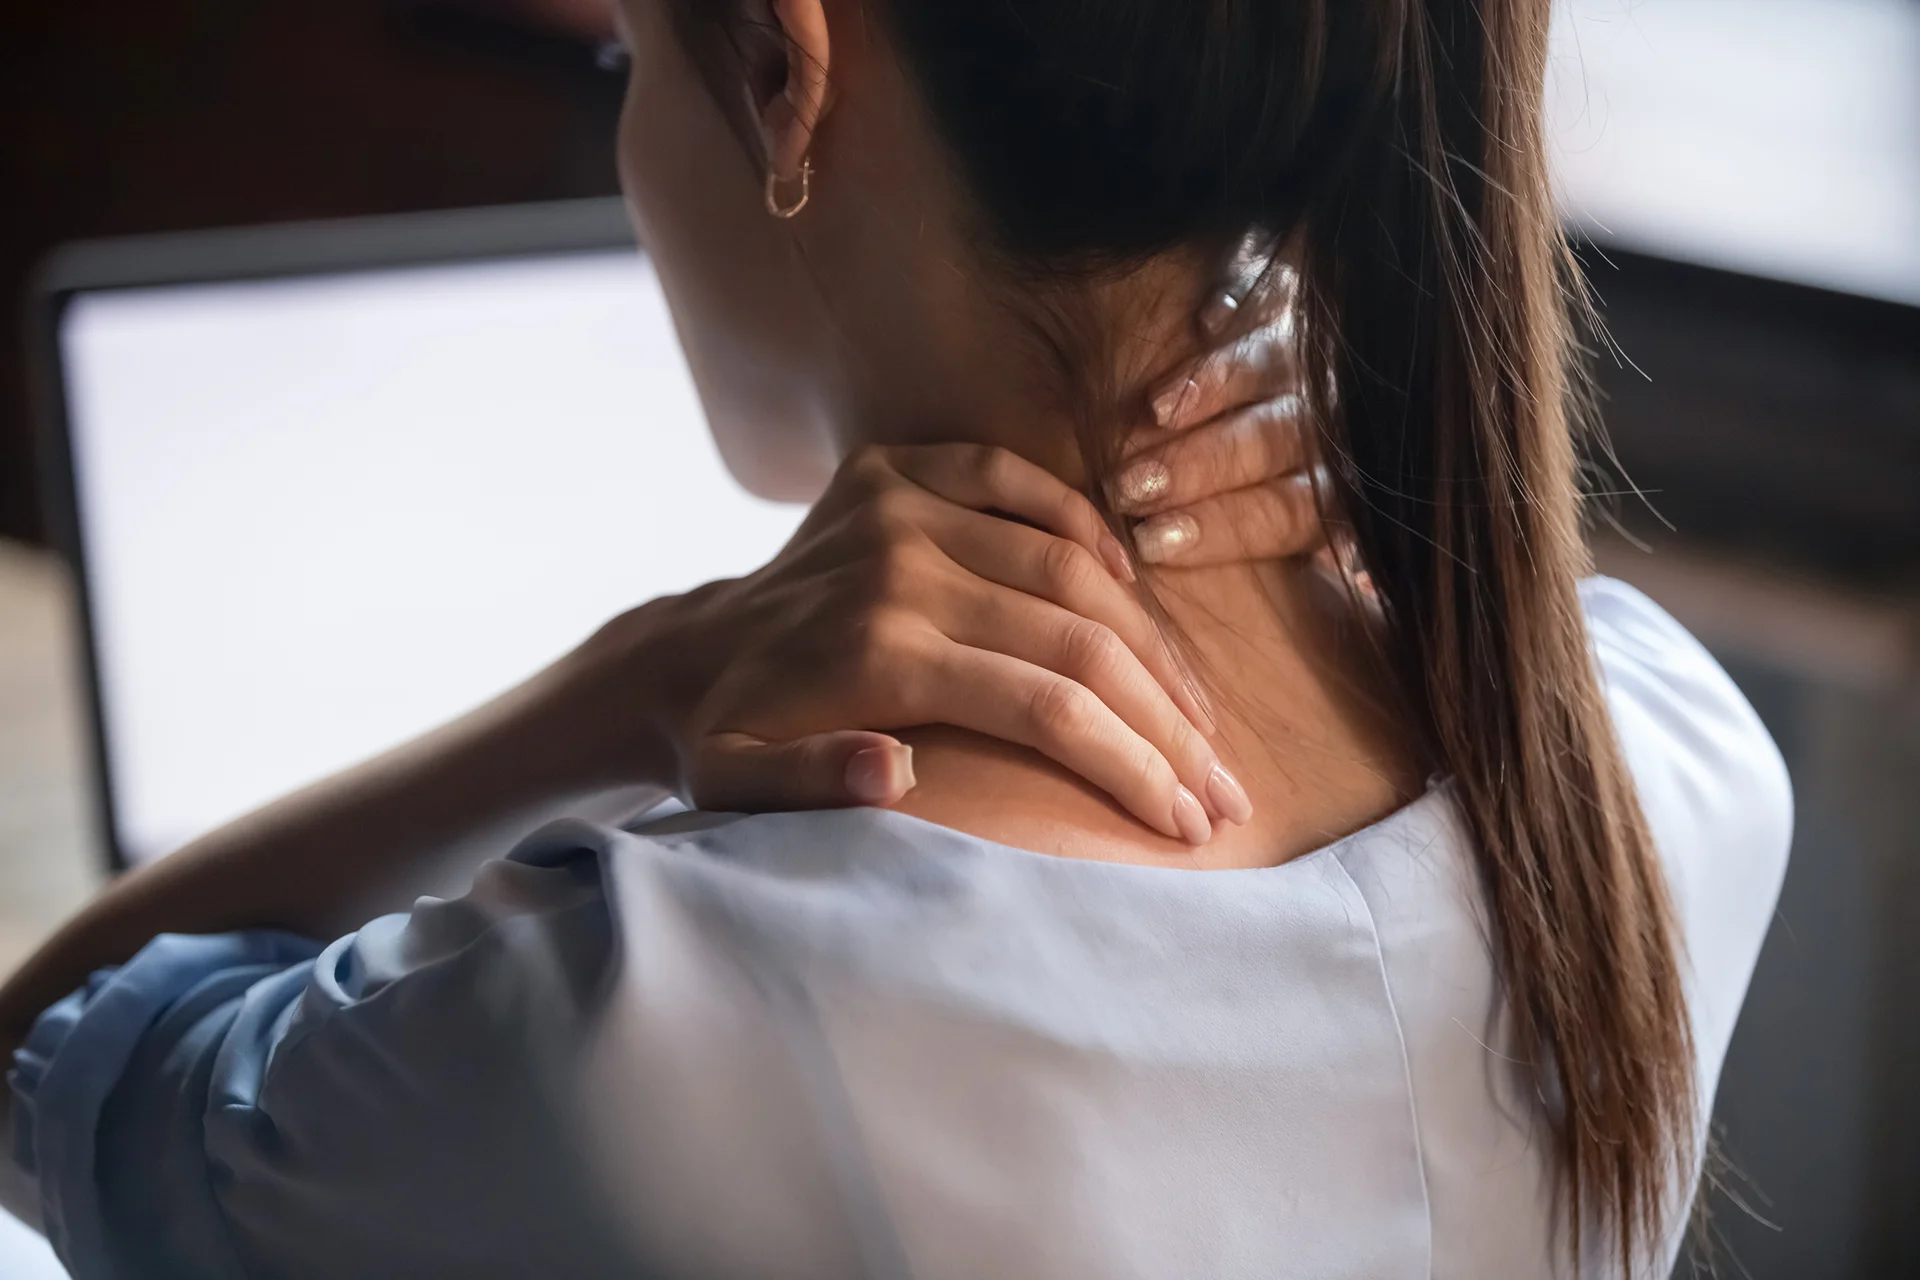 lump pain on the back of the neck near the spine